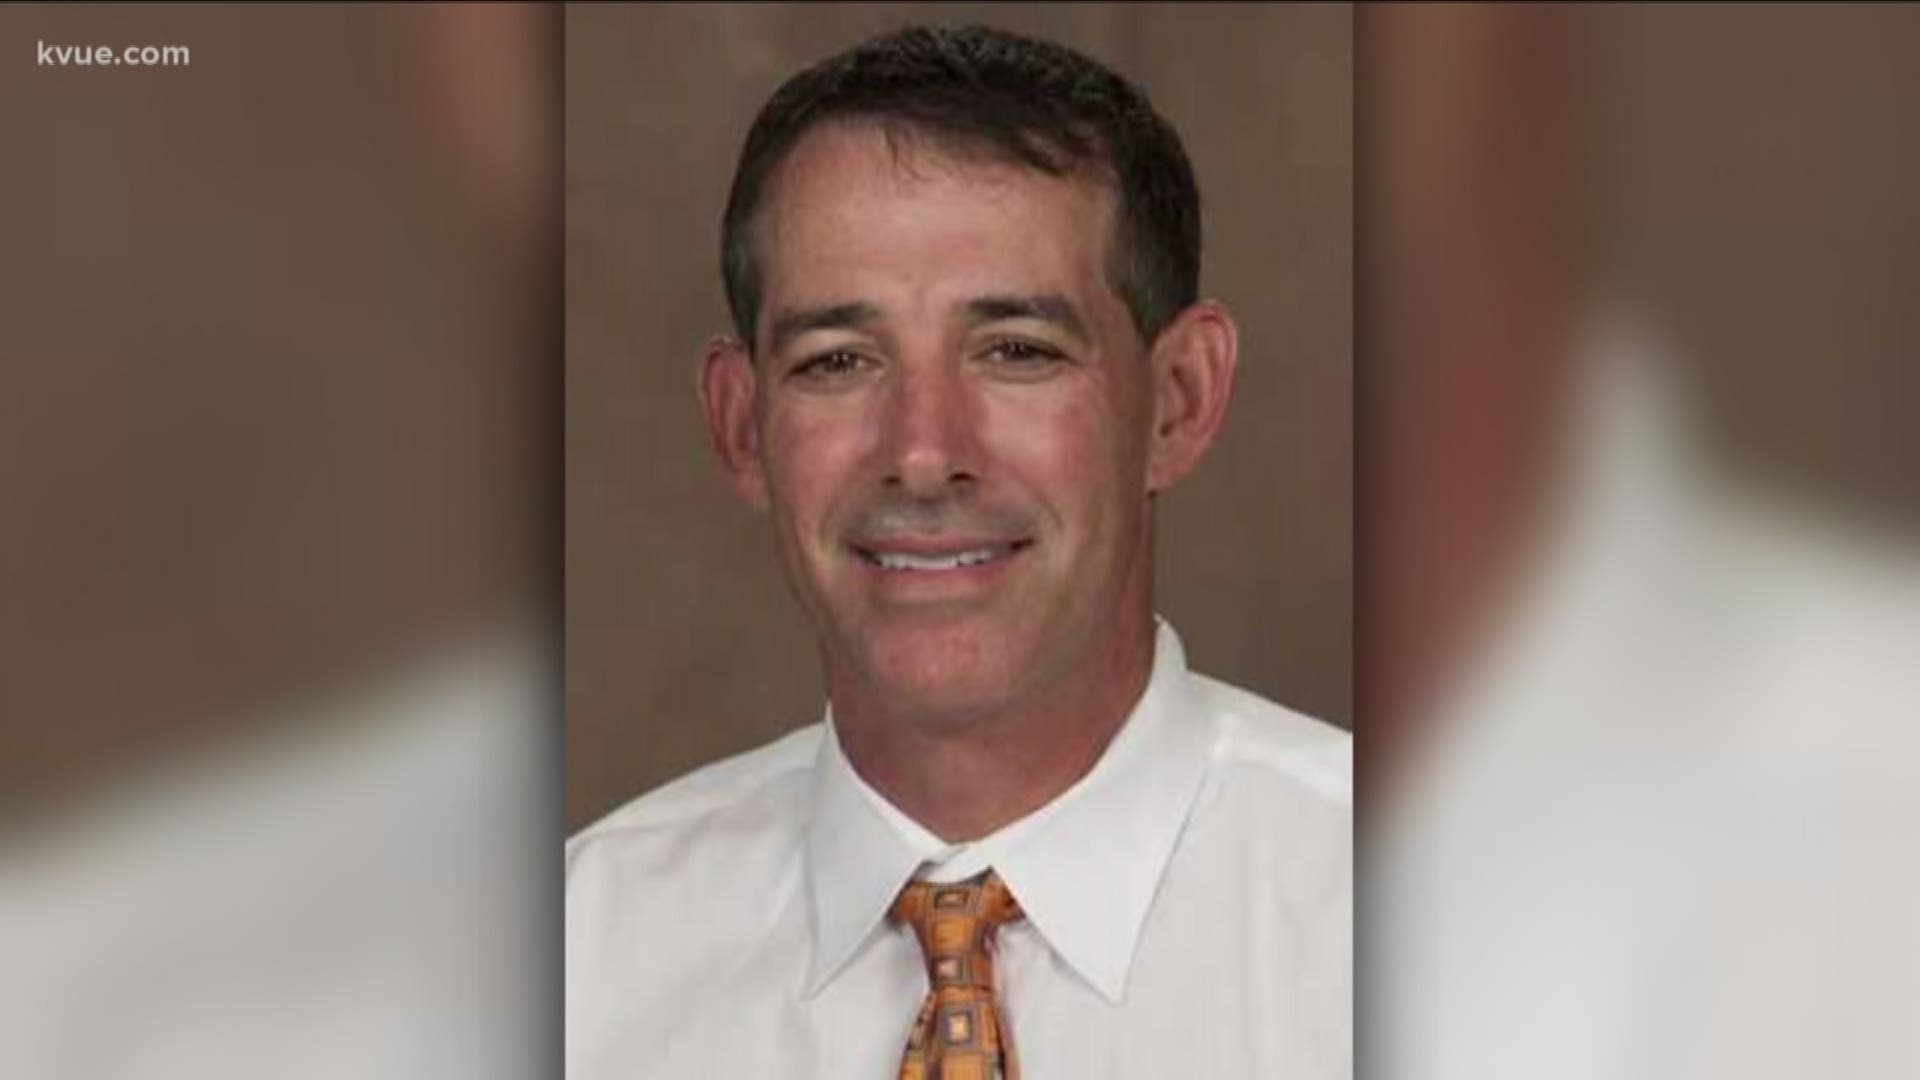 Federal agents say Michael Center, the Longhorns' men's tennis coach, accepted nearly $100,000 in exchange for recruiting a student for the tennis team.